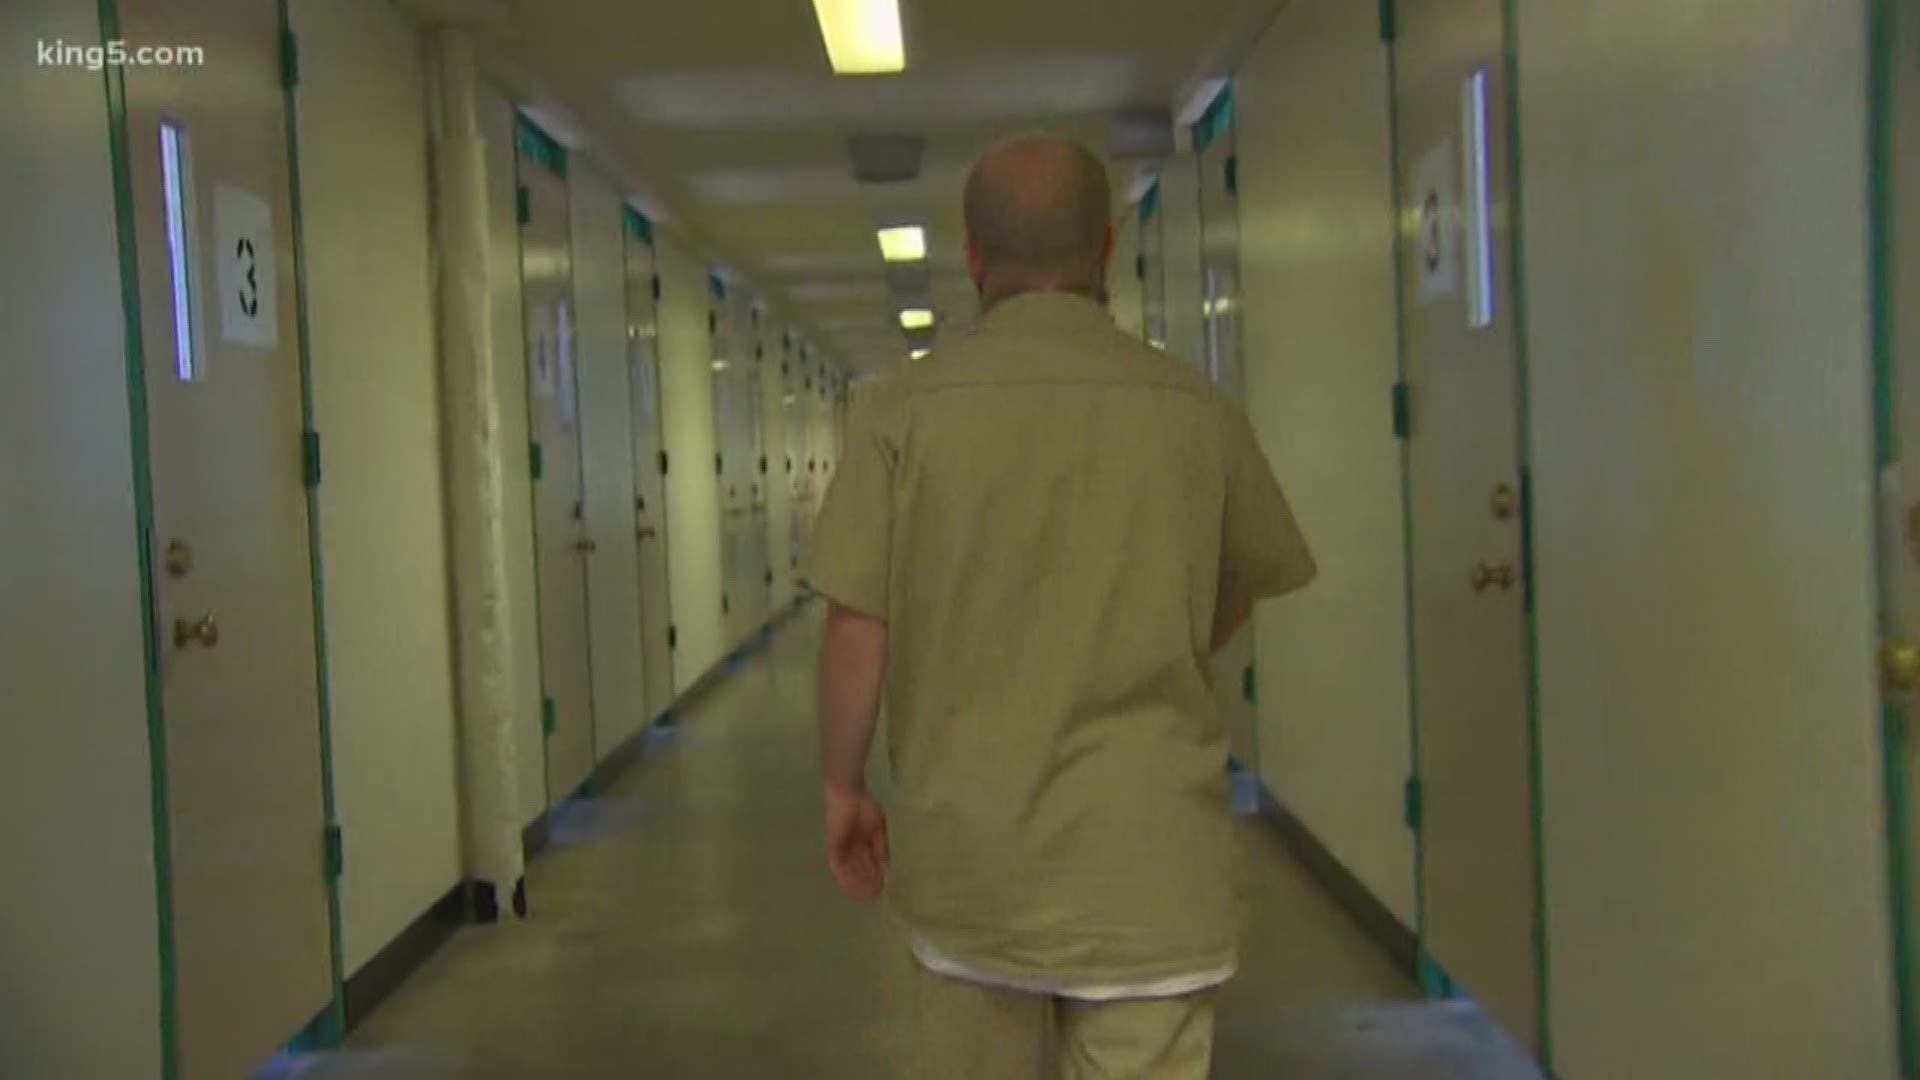 King 5's Drew Mikkelson explains how inmates serving long sentences, including life without parole, might get that chance with a new bill proposed in Olympia. Inmates would be able to ask for their sentences to be reviewed after serving 15 years.